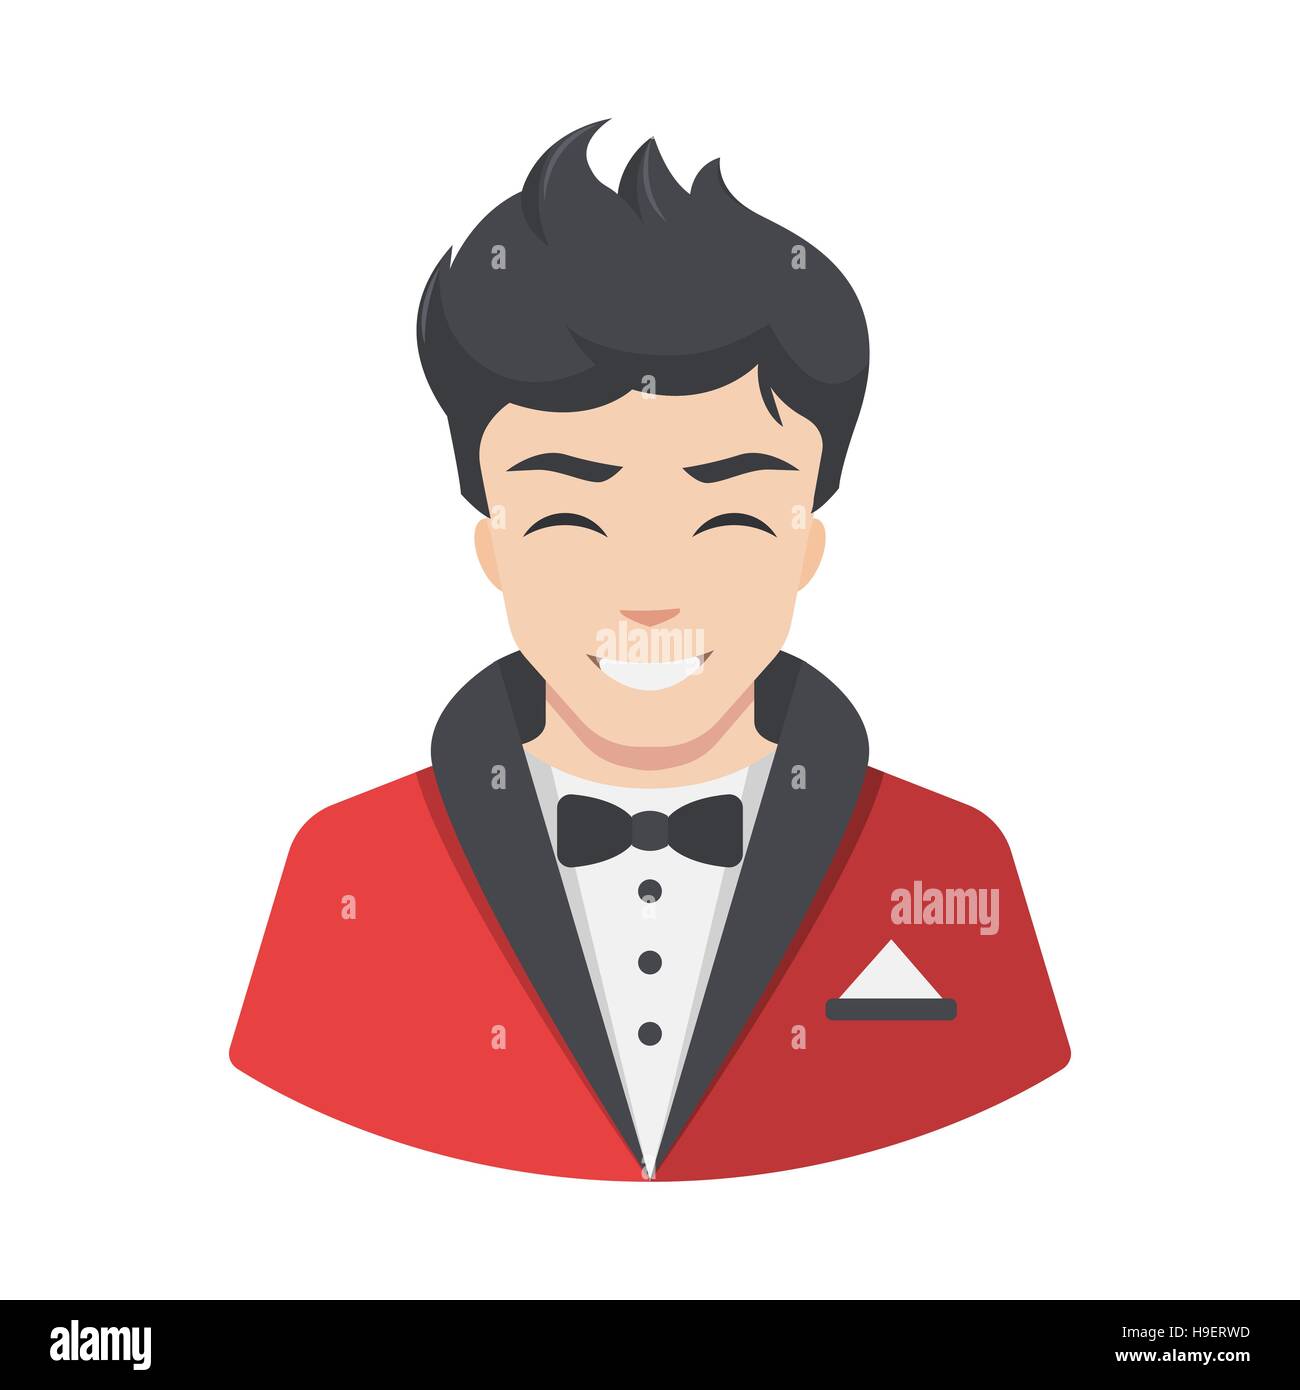 Actor icon. Rich celebrity men actor in suit tailcoat. Flat style vector illustration isolated on white background. Stock Vector